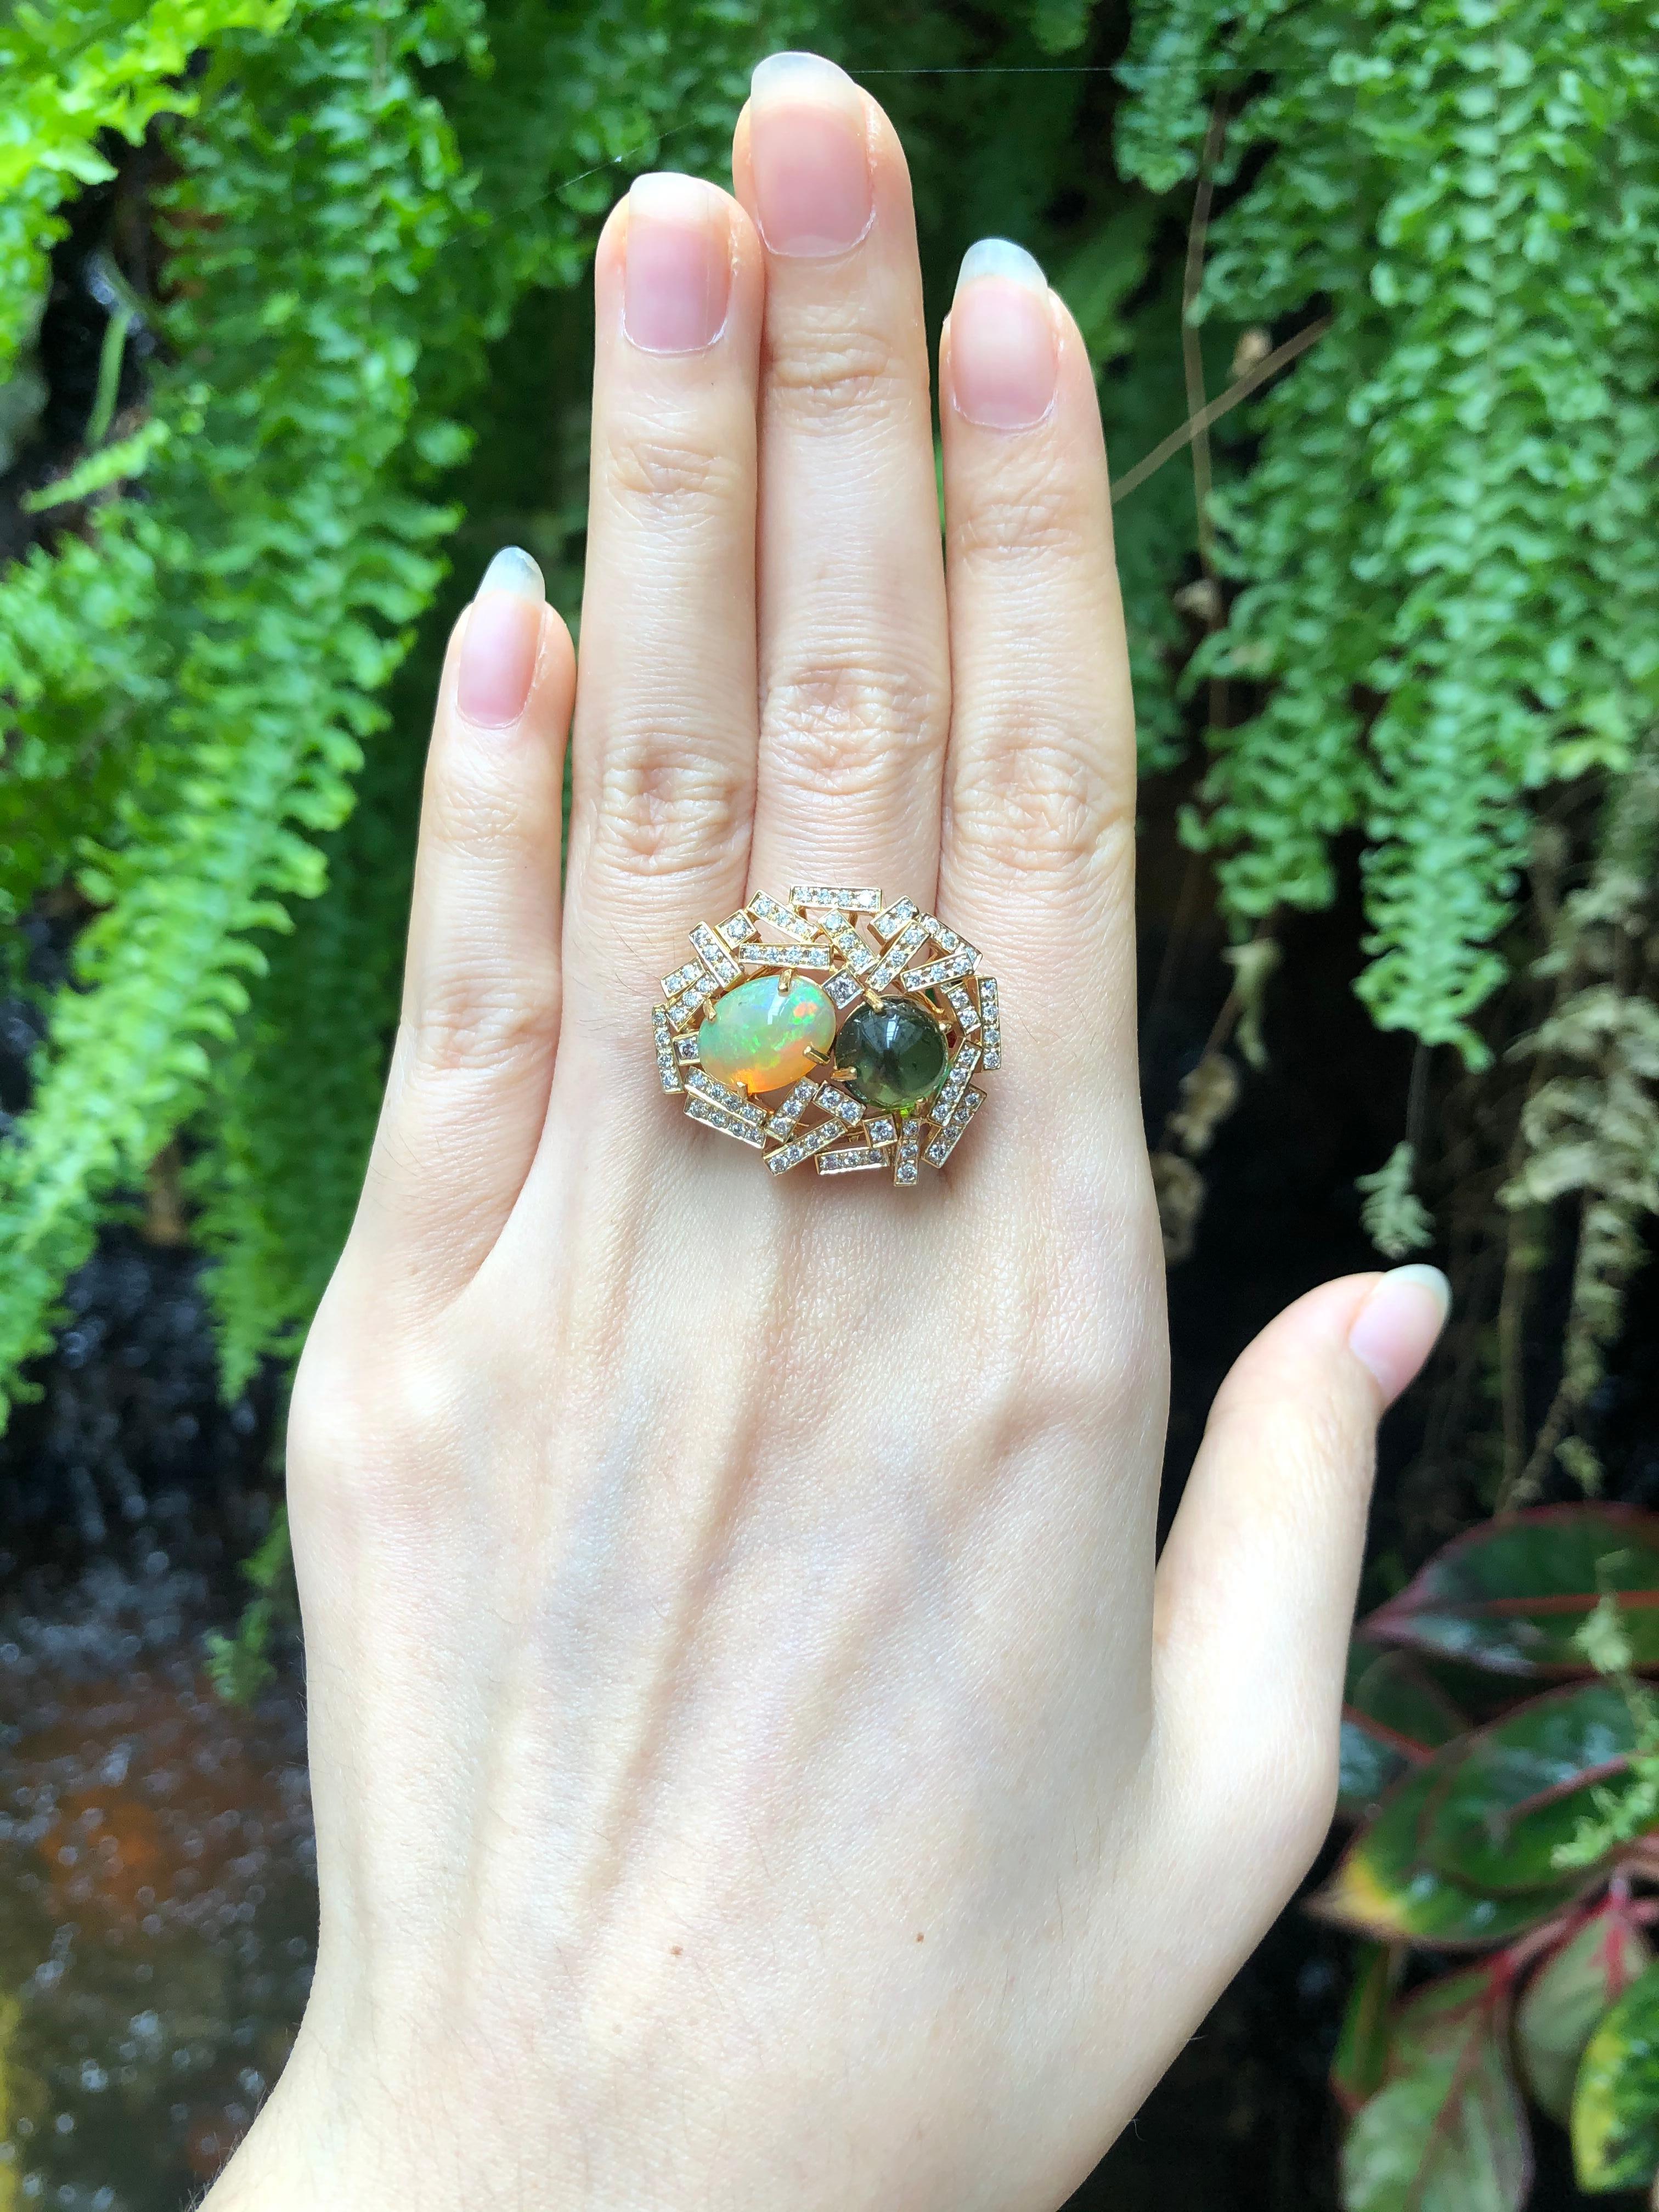 Opal 2.06 carats, Cabochon Green Tourmaline 3.52 carats with Brown Diamond 0.79 carat Ring set in 18 Karat Gold Settings

Width:  3.0 cm 
Length: 2.5cm
Ring Size: 56
Total Weight: 15.72 grams

